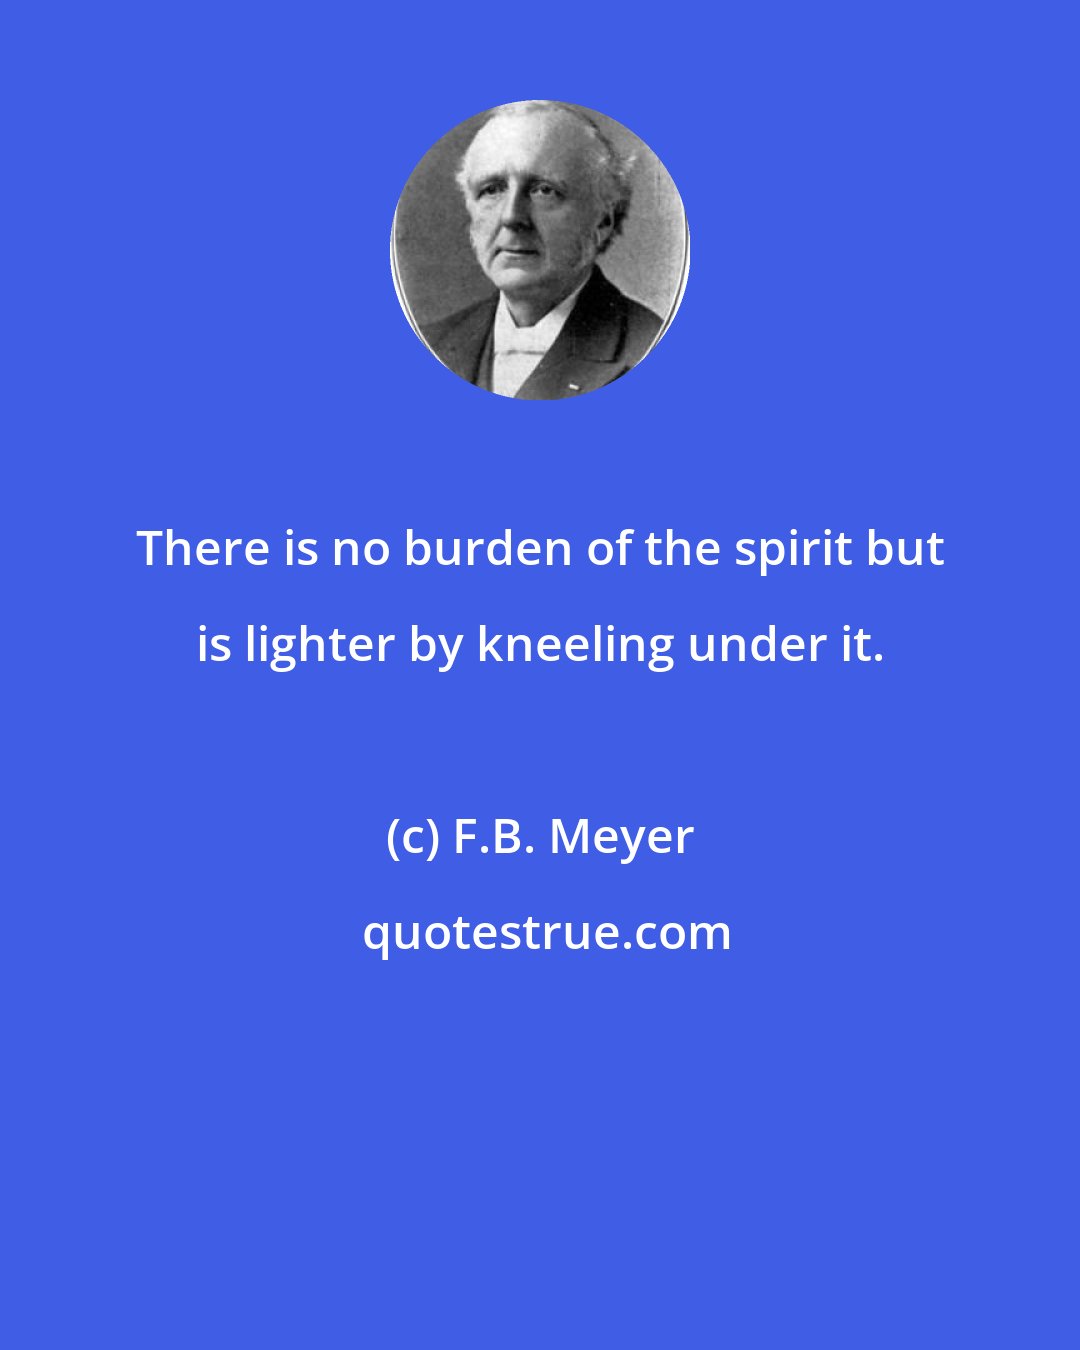 F.B. Meyer: There is no burden of the spirit but is lighter by kneeling under it.